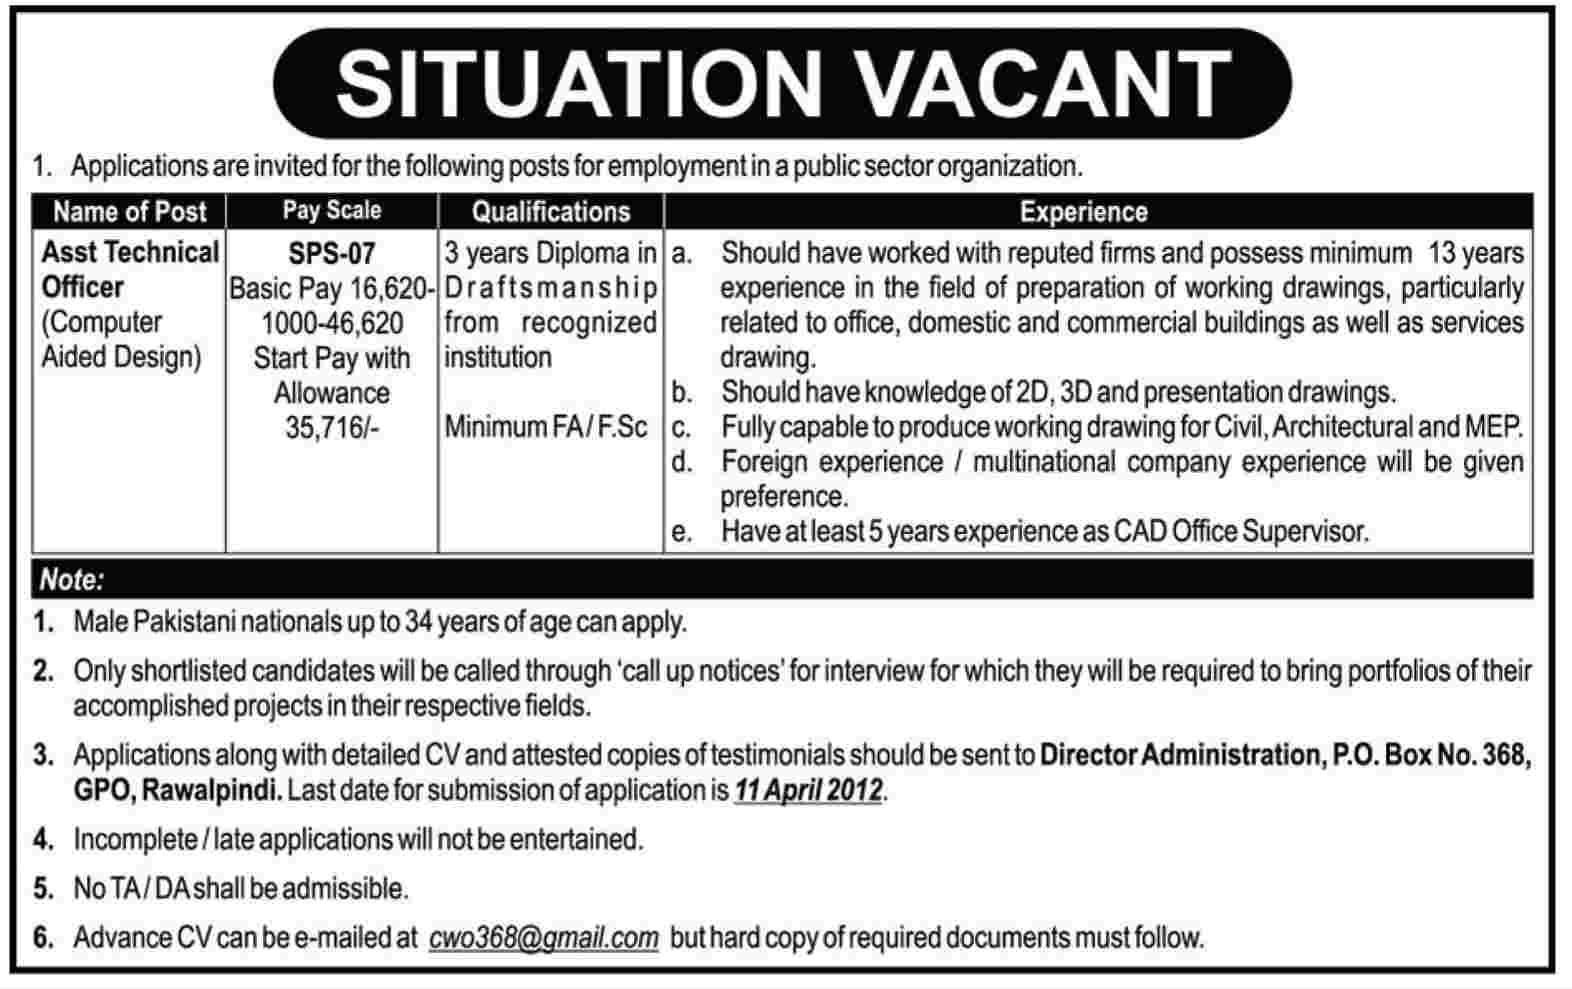 Public Sector Organization Requires Assistant Technical Officer